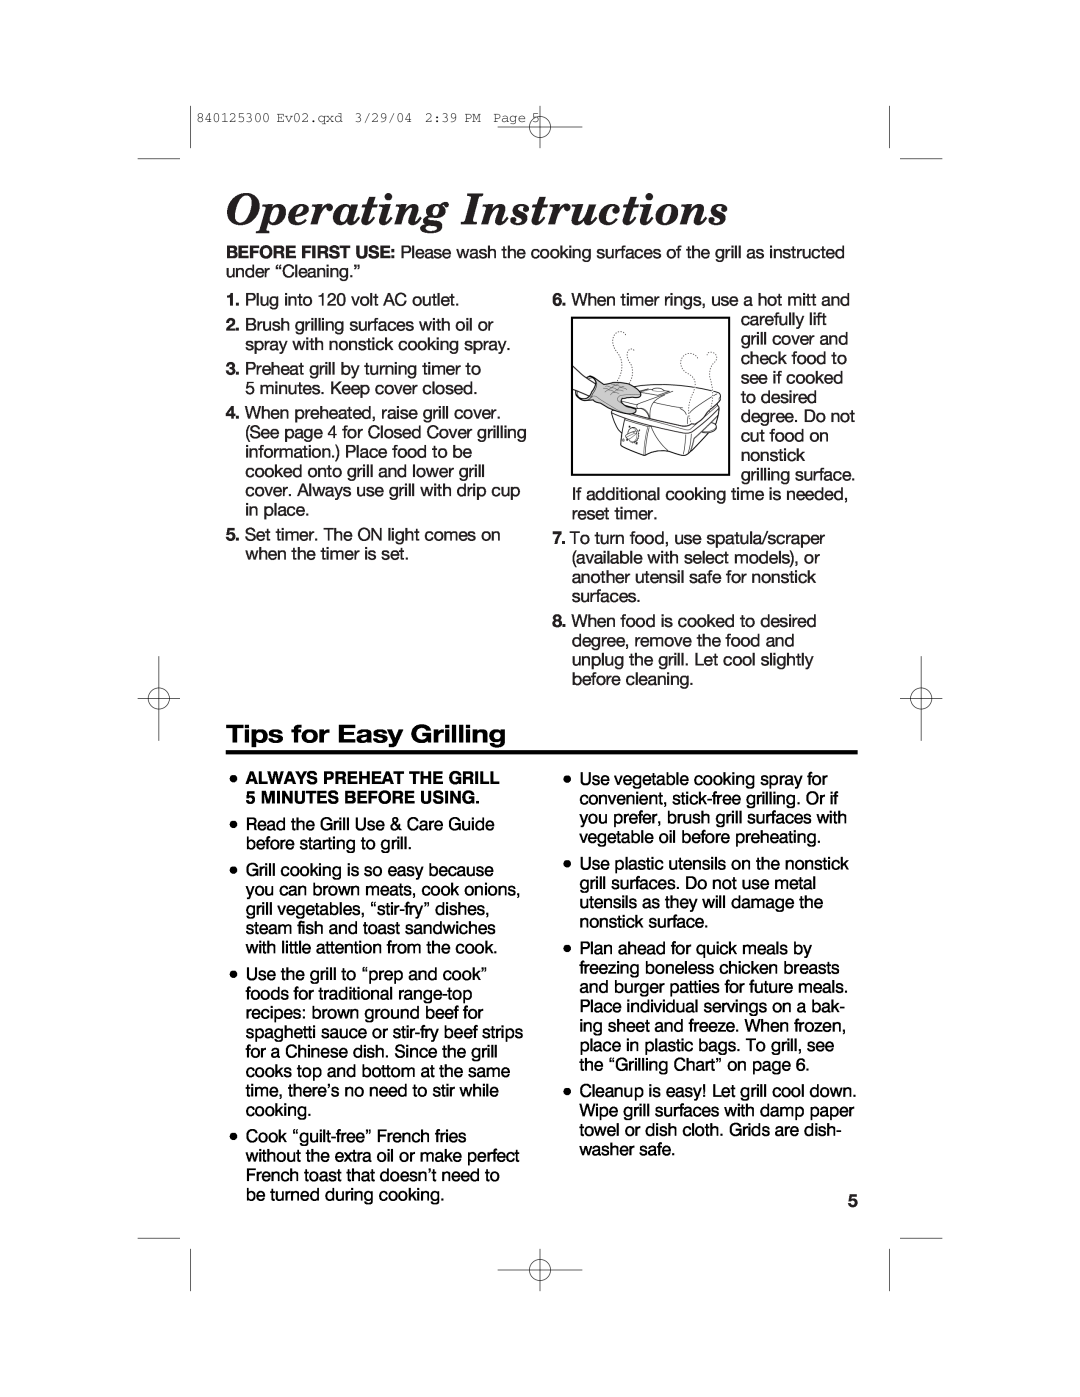 Hamilton Beach 25295 manual Operating Instructions, Tips for Easy Grilling, ALWAYS PREHEAT THE GRILL 5 MINUTES BEFORE USING 